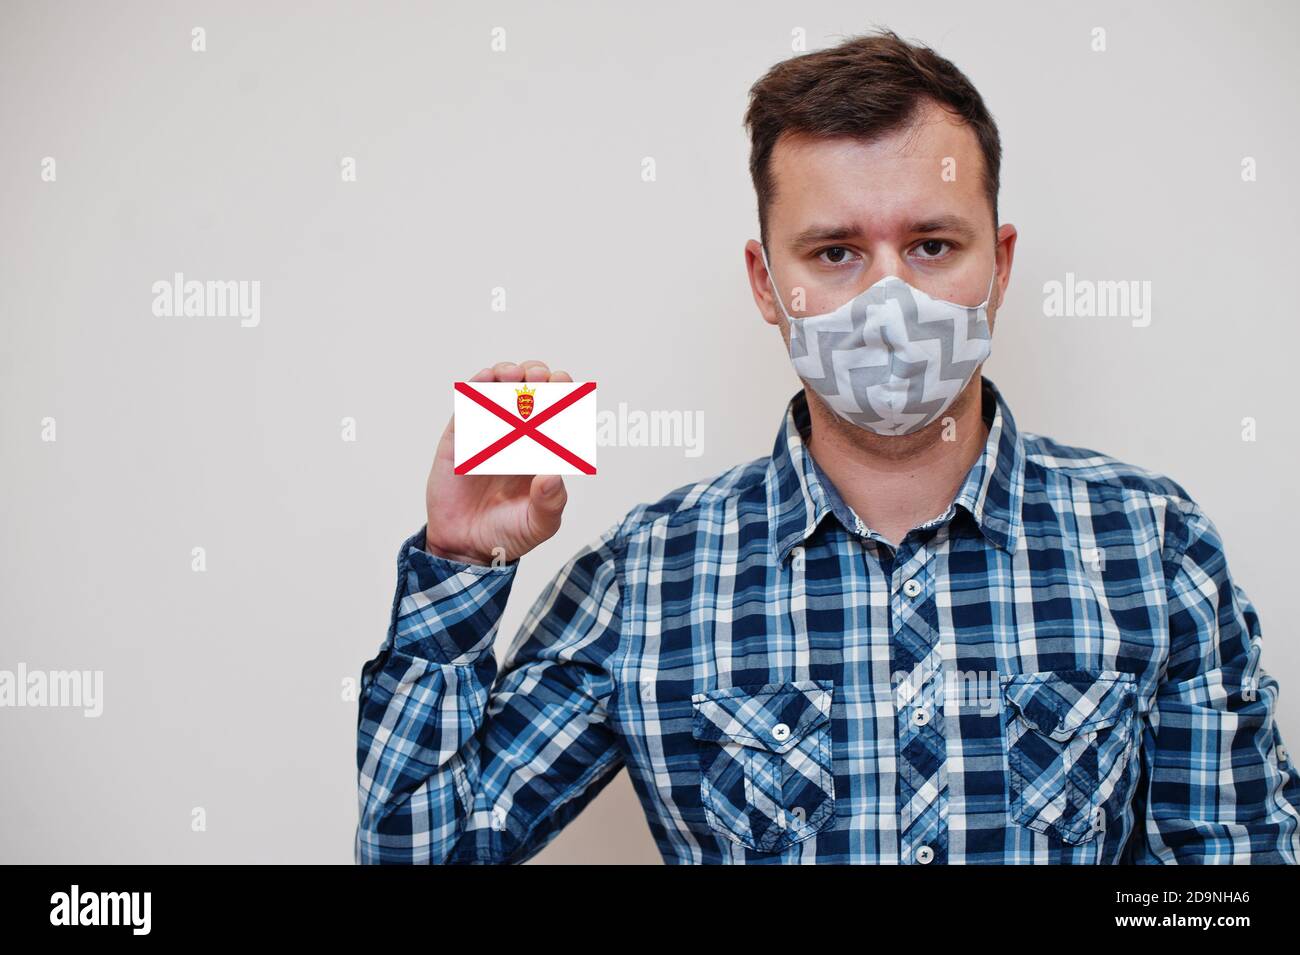 Man in checkered shirt show Bailiwick of Jersey flag card in hand, wear protect mask isolated on white background. Europe countries Coronavirus concep Stock Photo